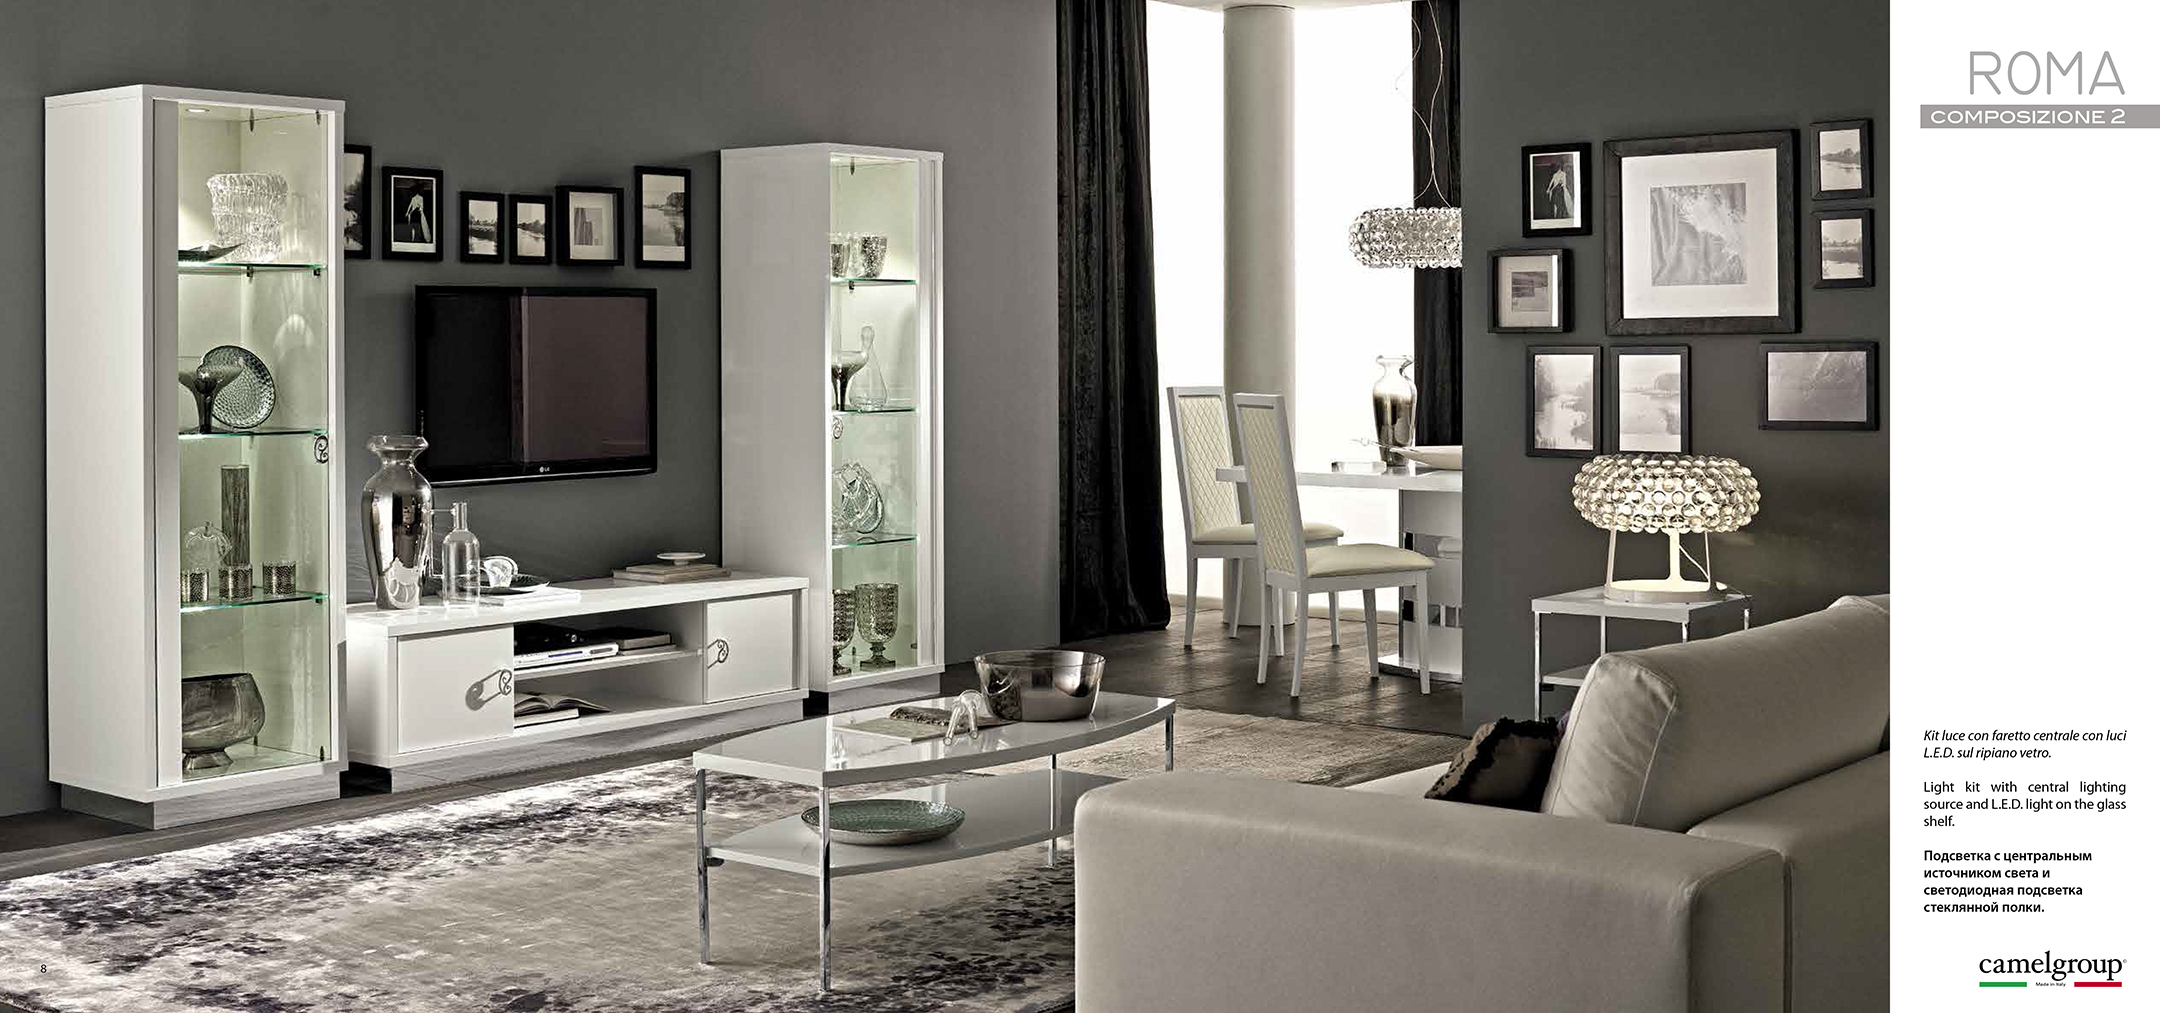 Brands MSC Modern Wall Unit, Italy Roma White Additional Items